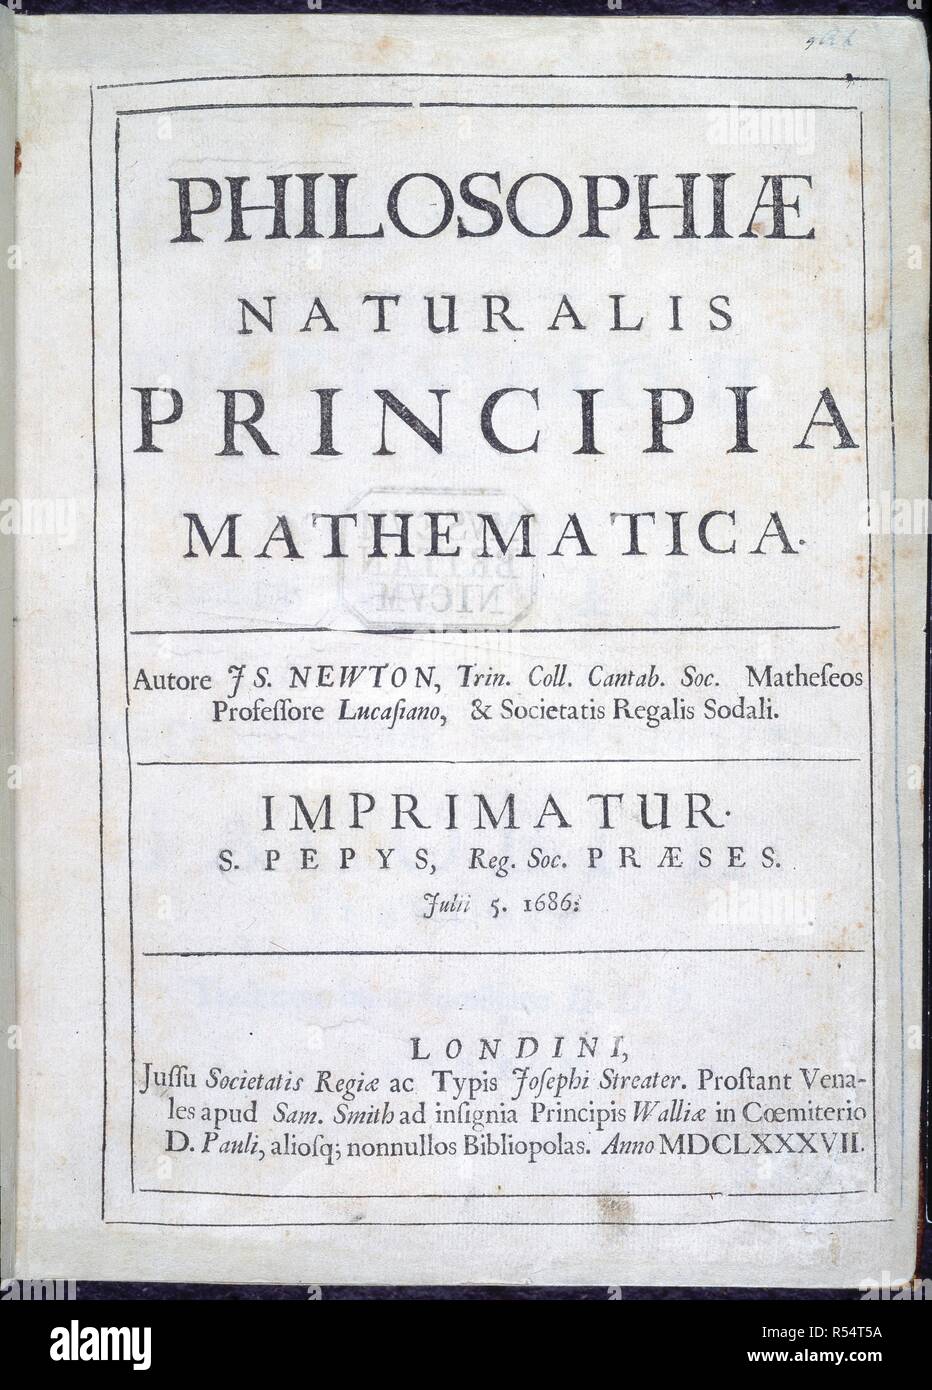 Title page. Philosophiae Naturalis Principia Mathematica. London, 1687. Title page of Philosophiae Naturalis Principia Mathematica.  Image taken from Philosophiae Naturalis Principia Mathematica.  Originally published/produced in London, 1687. . Source: C.58.h.4, title page. Stock Photo